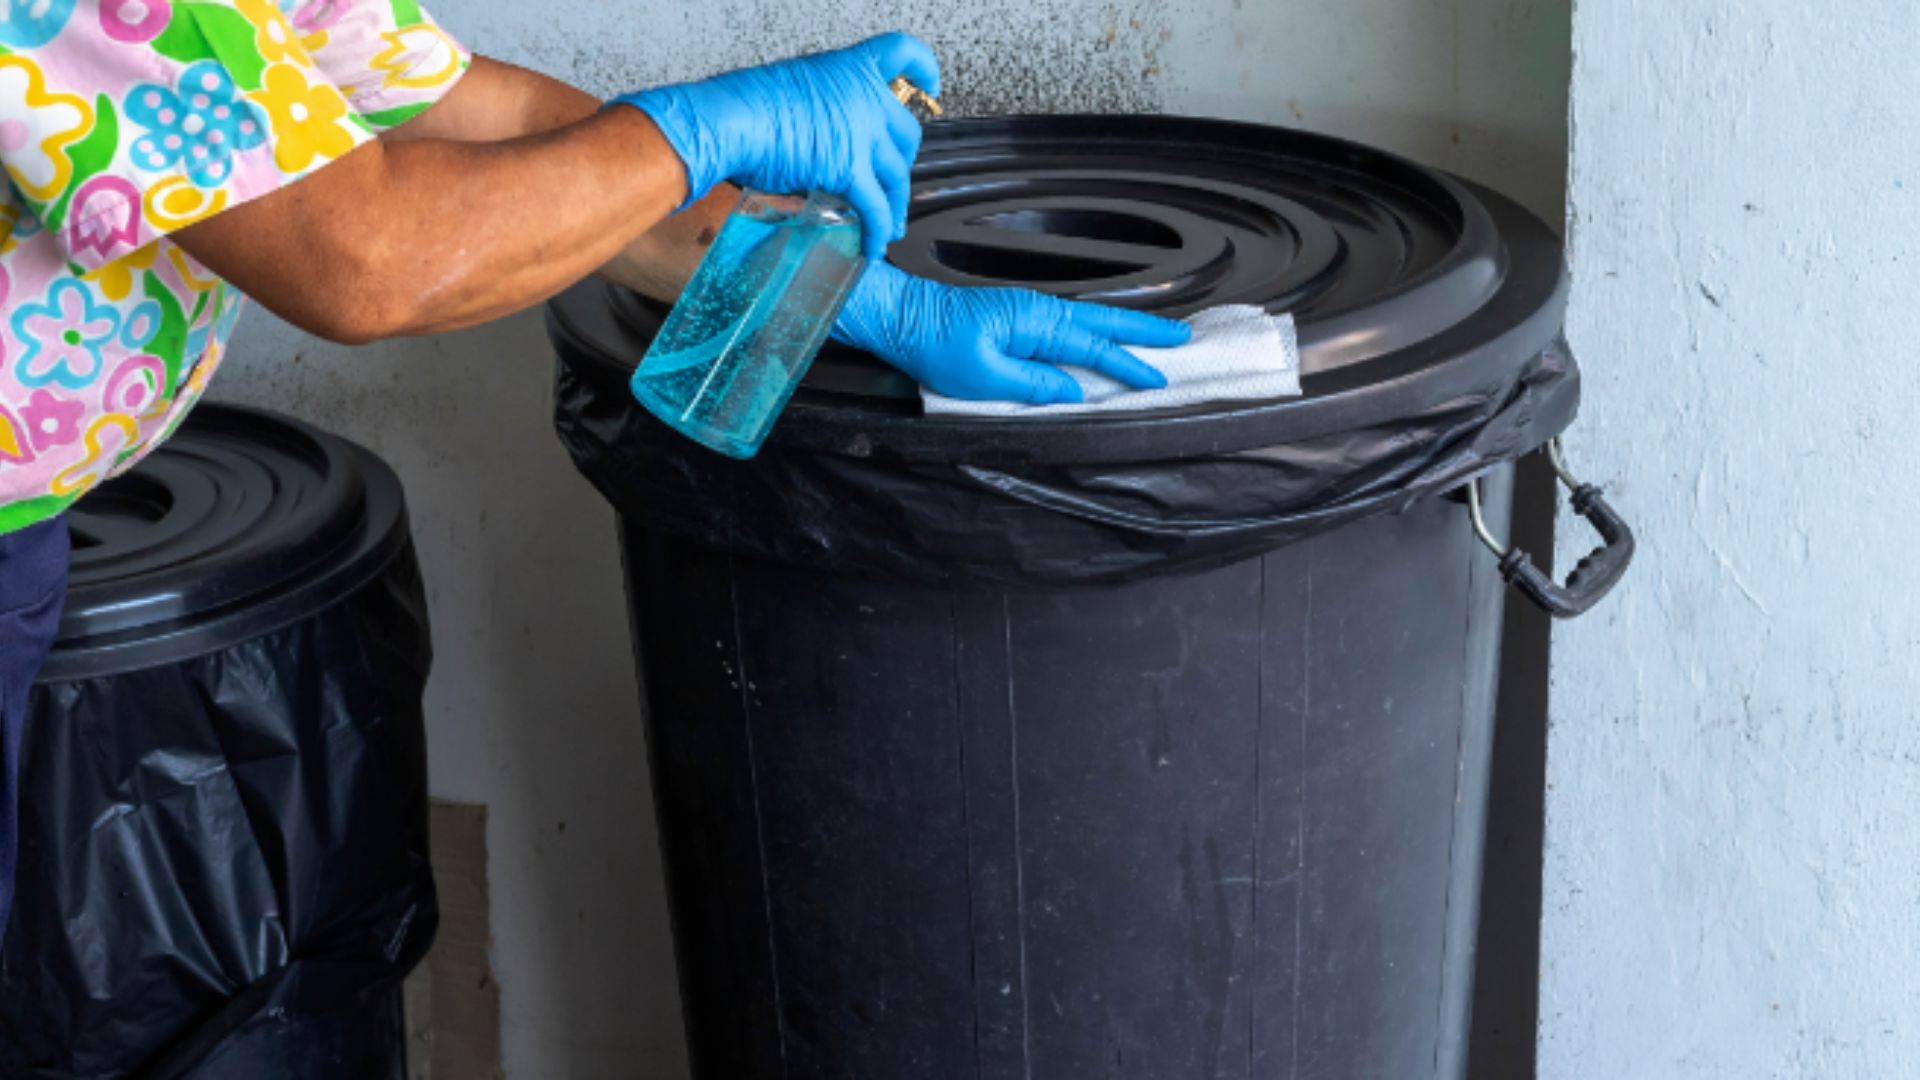 image of a person cleaning waste bins